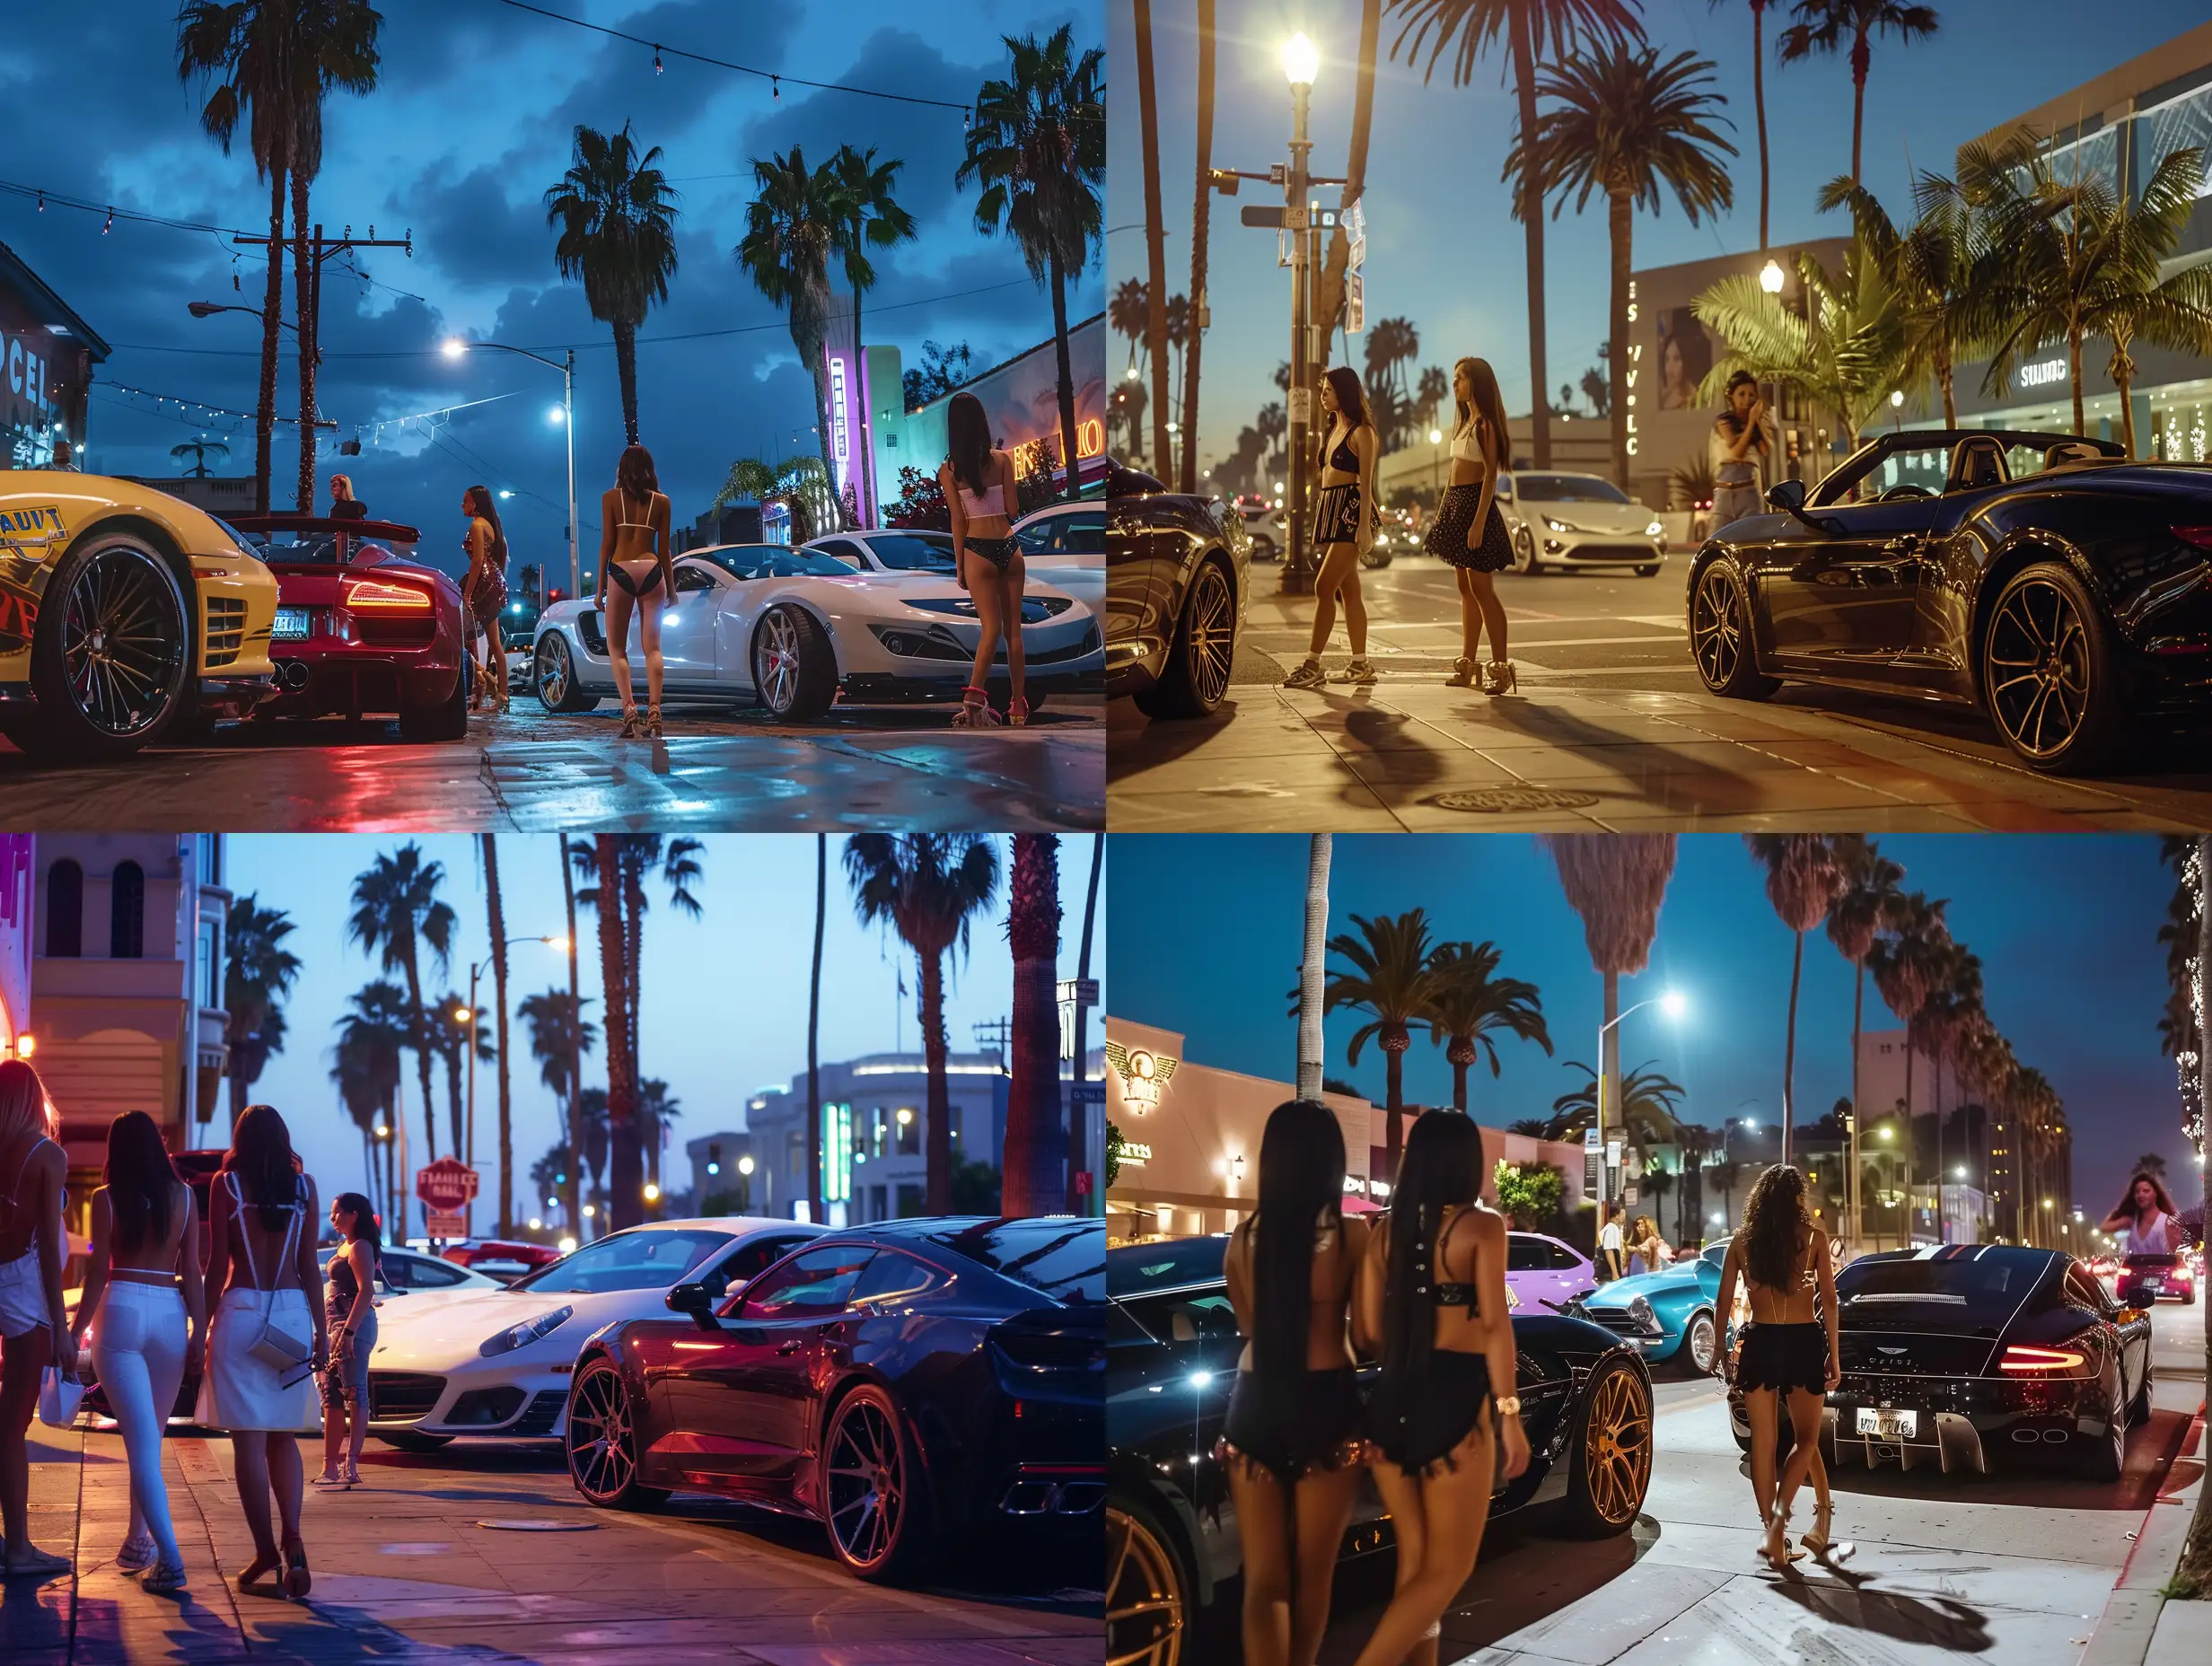 Late-Night-Stroll-on-Figueroa-Street-South-Los-Angeles-Glamour-with-Girls-and-Luxury-Cars